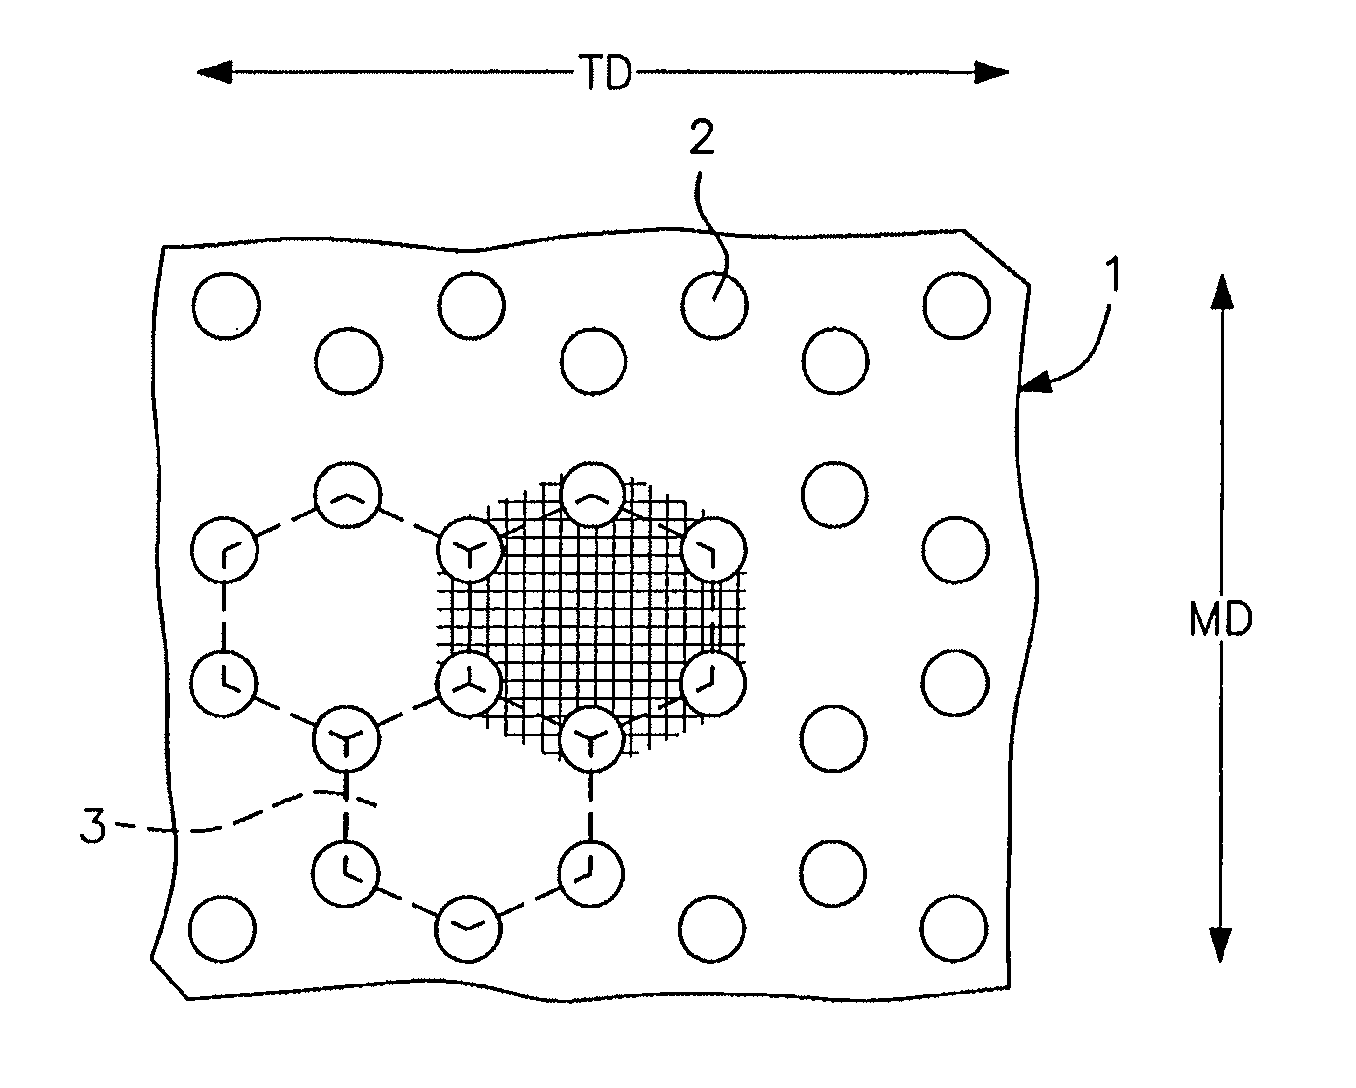 Multi-axial grid or mesh structures with high aspect ratio ribs